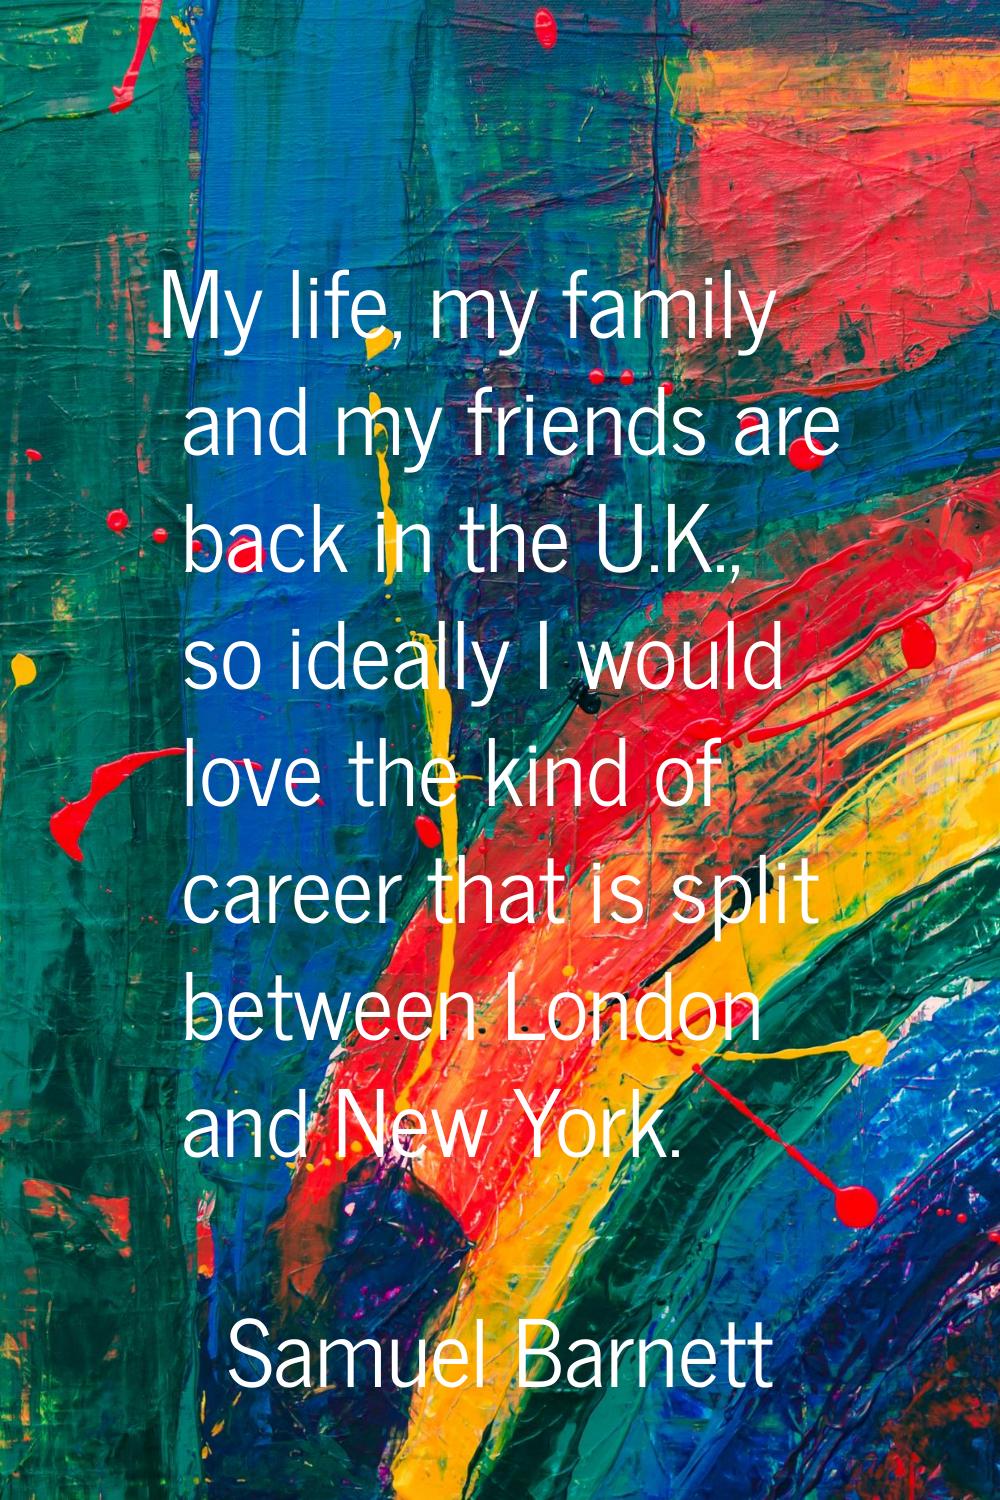 My life, my family and my friends are back in the U.K., so ideally I would love the kind of career 